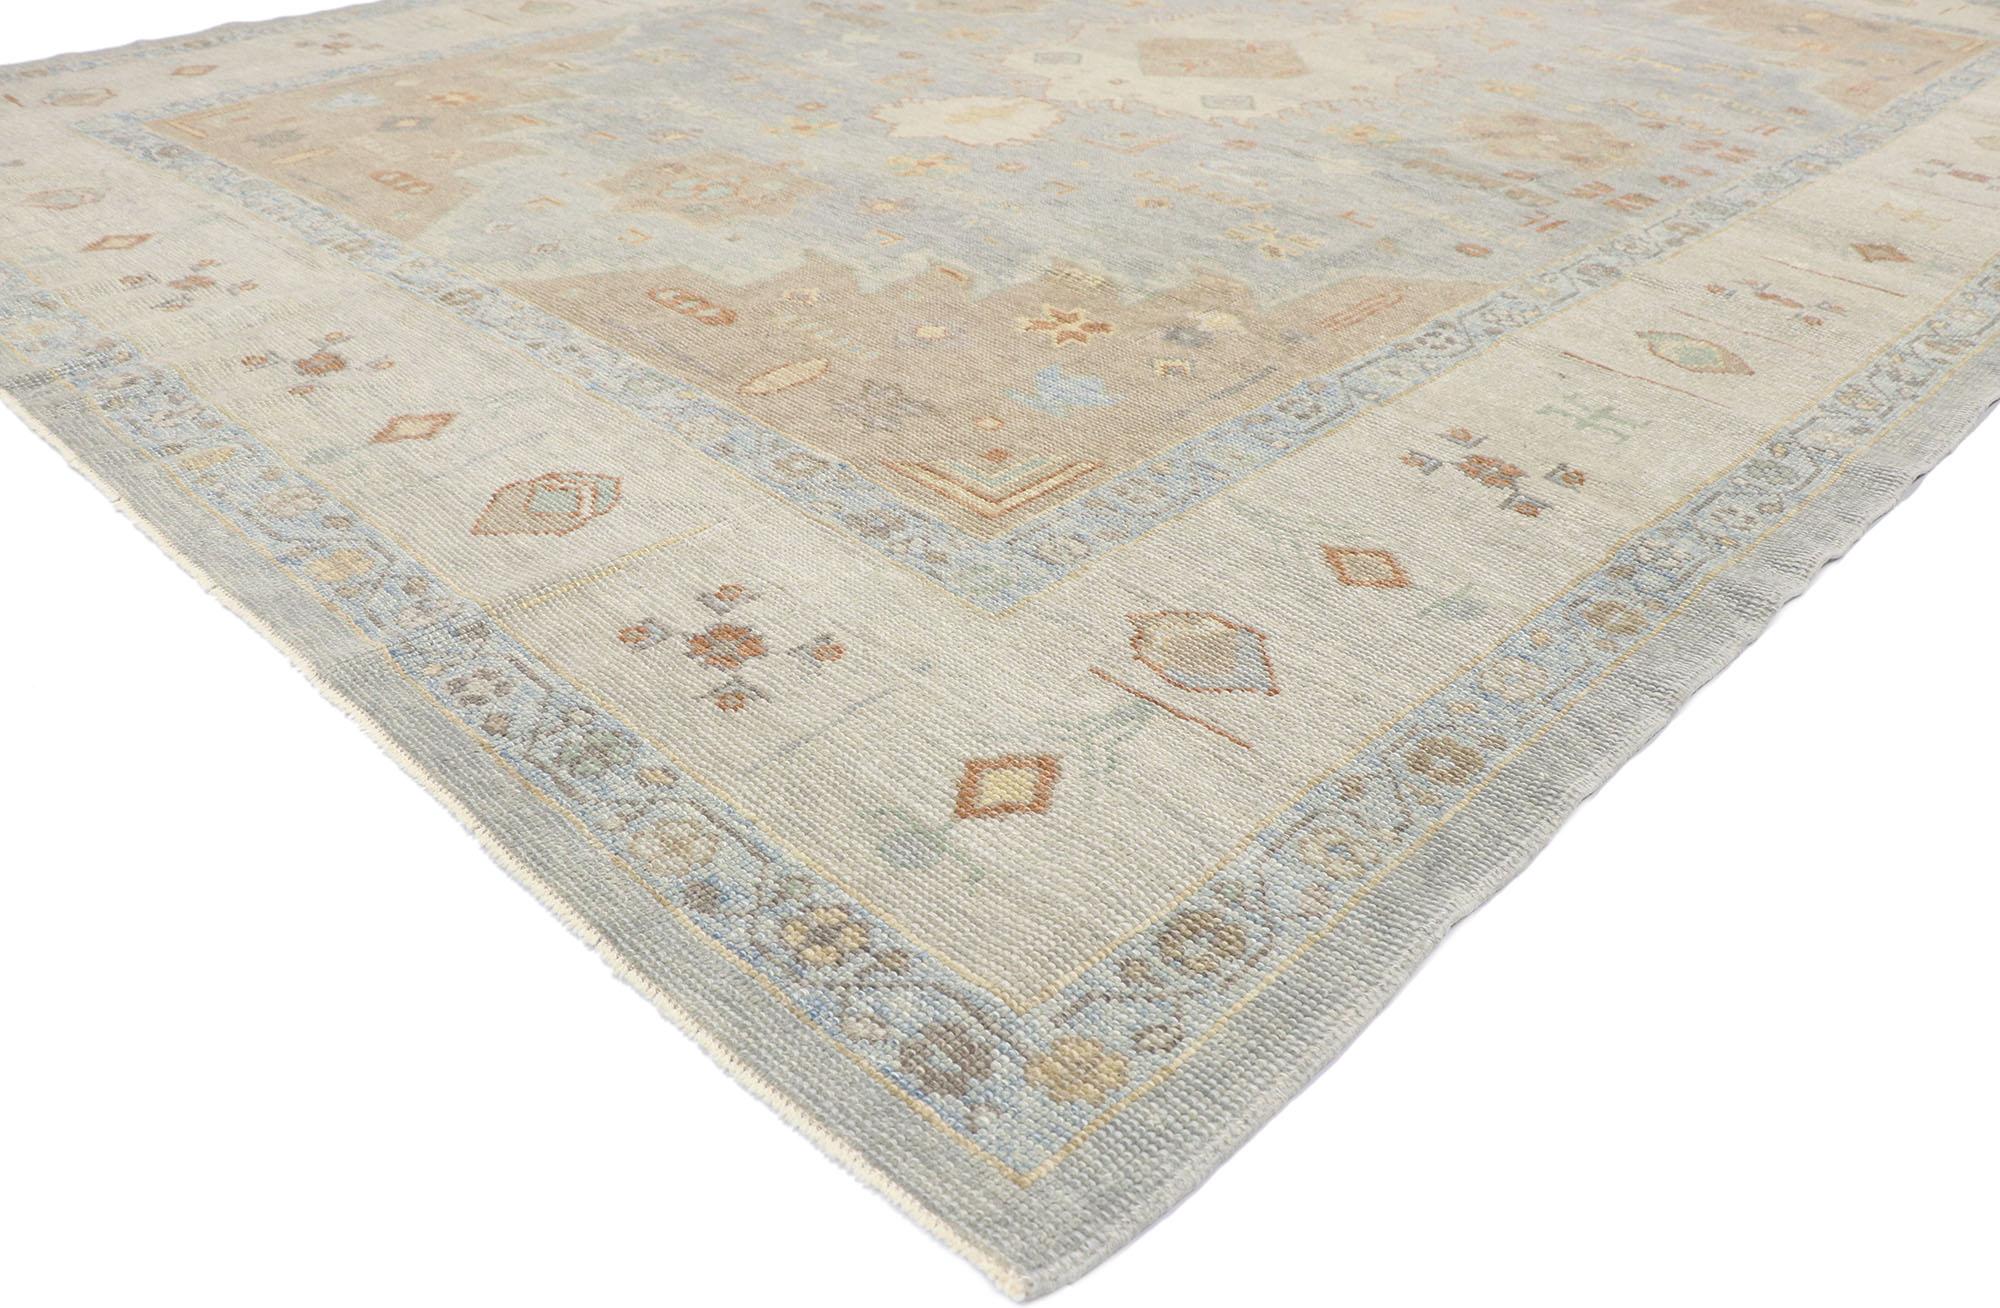 53490, new contemporary Turkish Oushak rug with transitional tribal stylw. Warm and inviting with neutral colors, this hand-knotted wool contemporary Turkish Oushak rug beautifully embodies tribal style with a transitional vibe. The abrashed gray